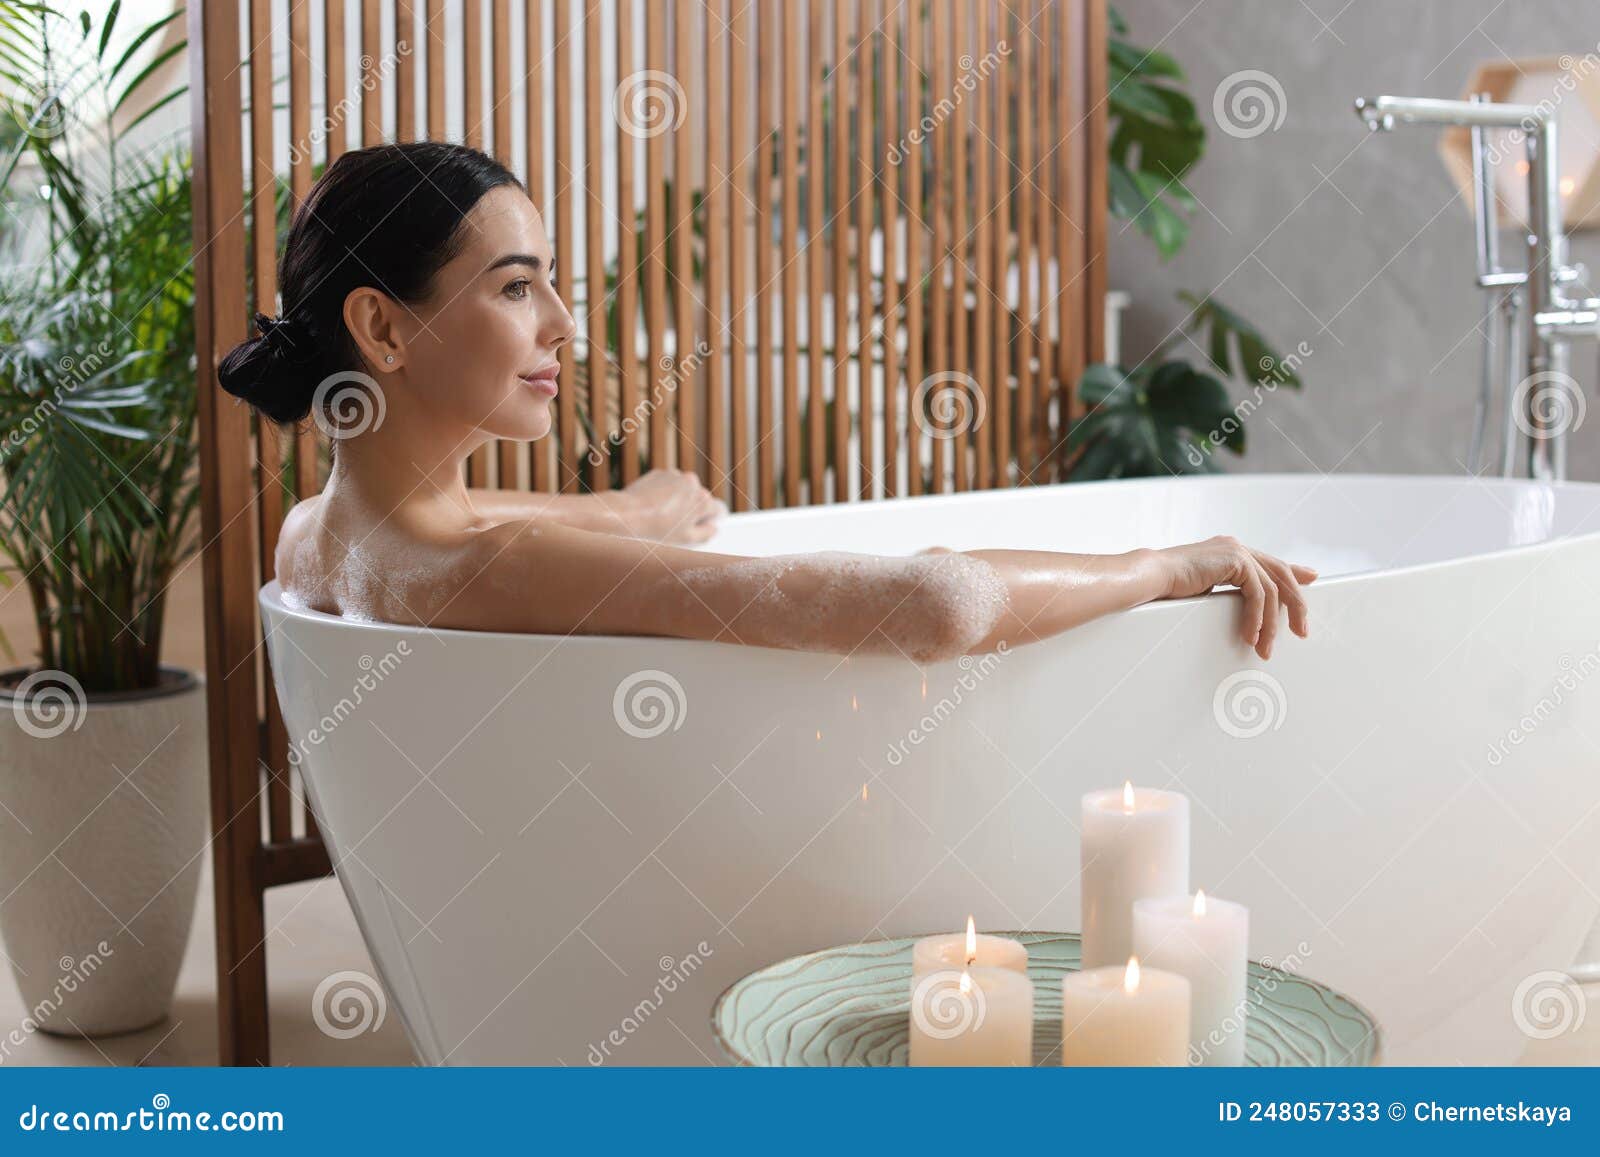 Beautiful Young Woman Taking Bubble Bath At Home Stock Image Image Of Home Lady 248057333 